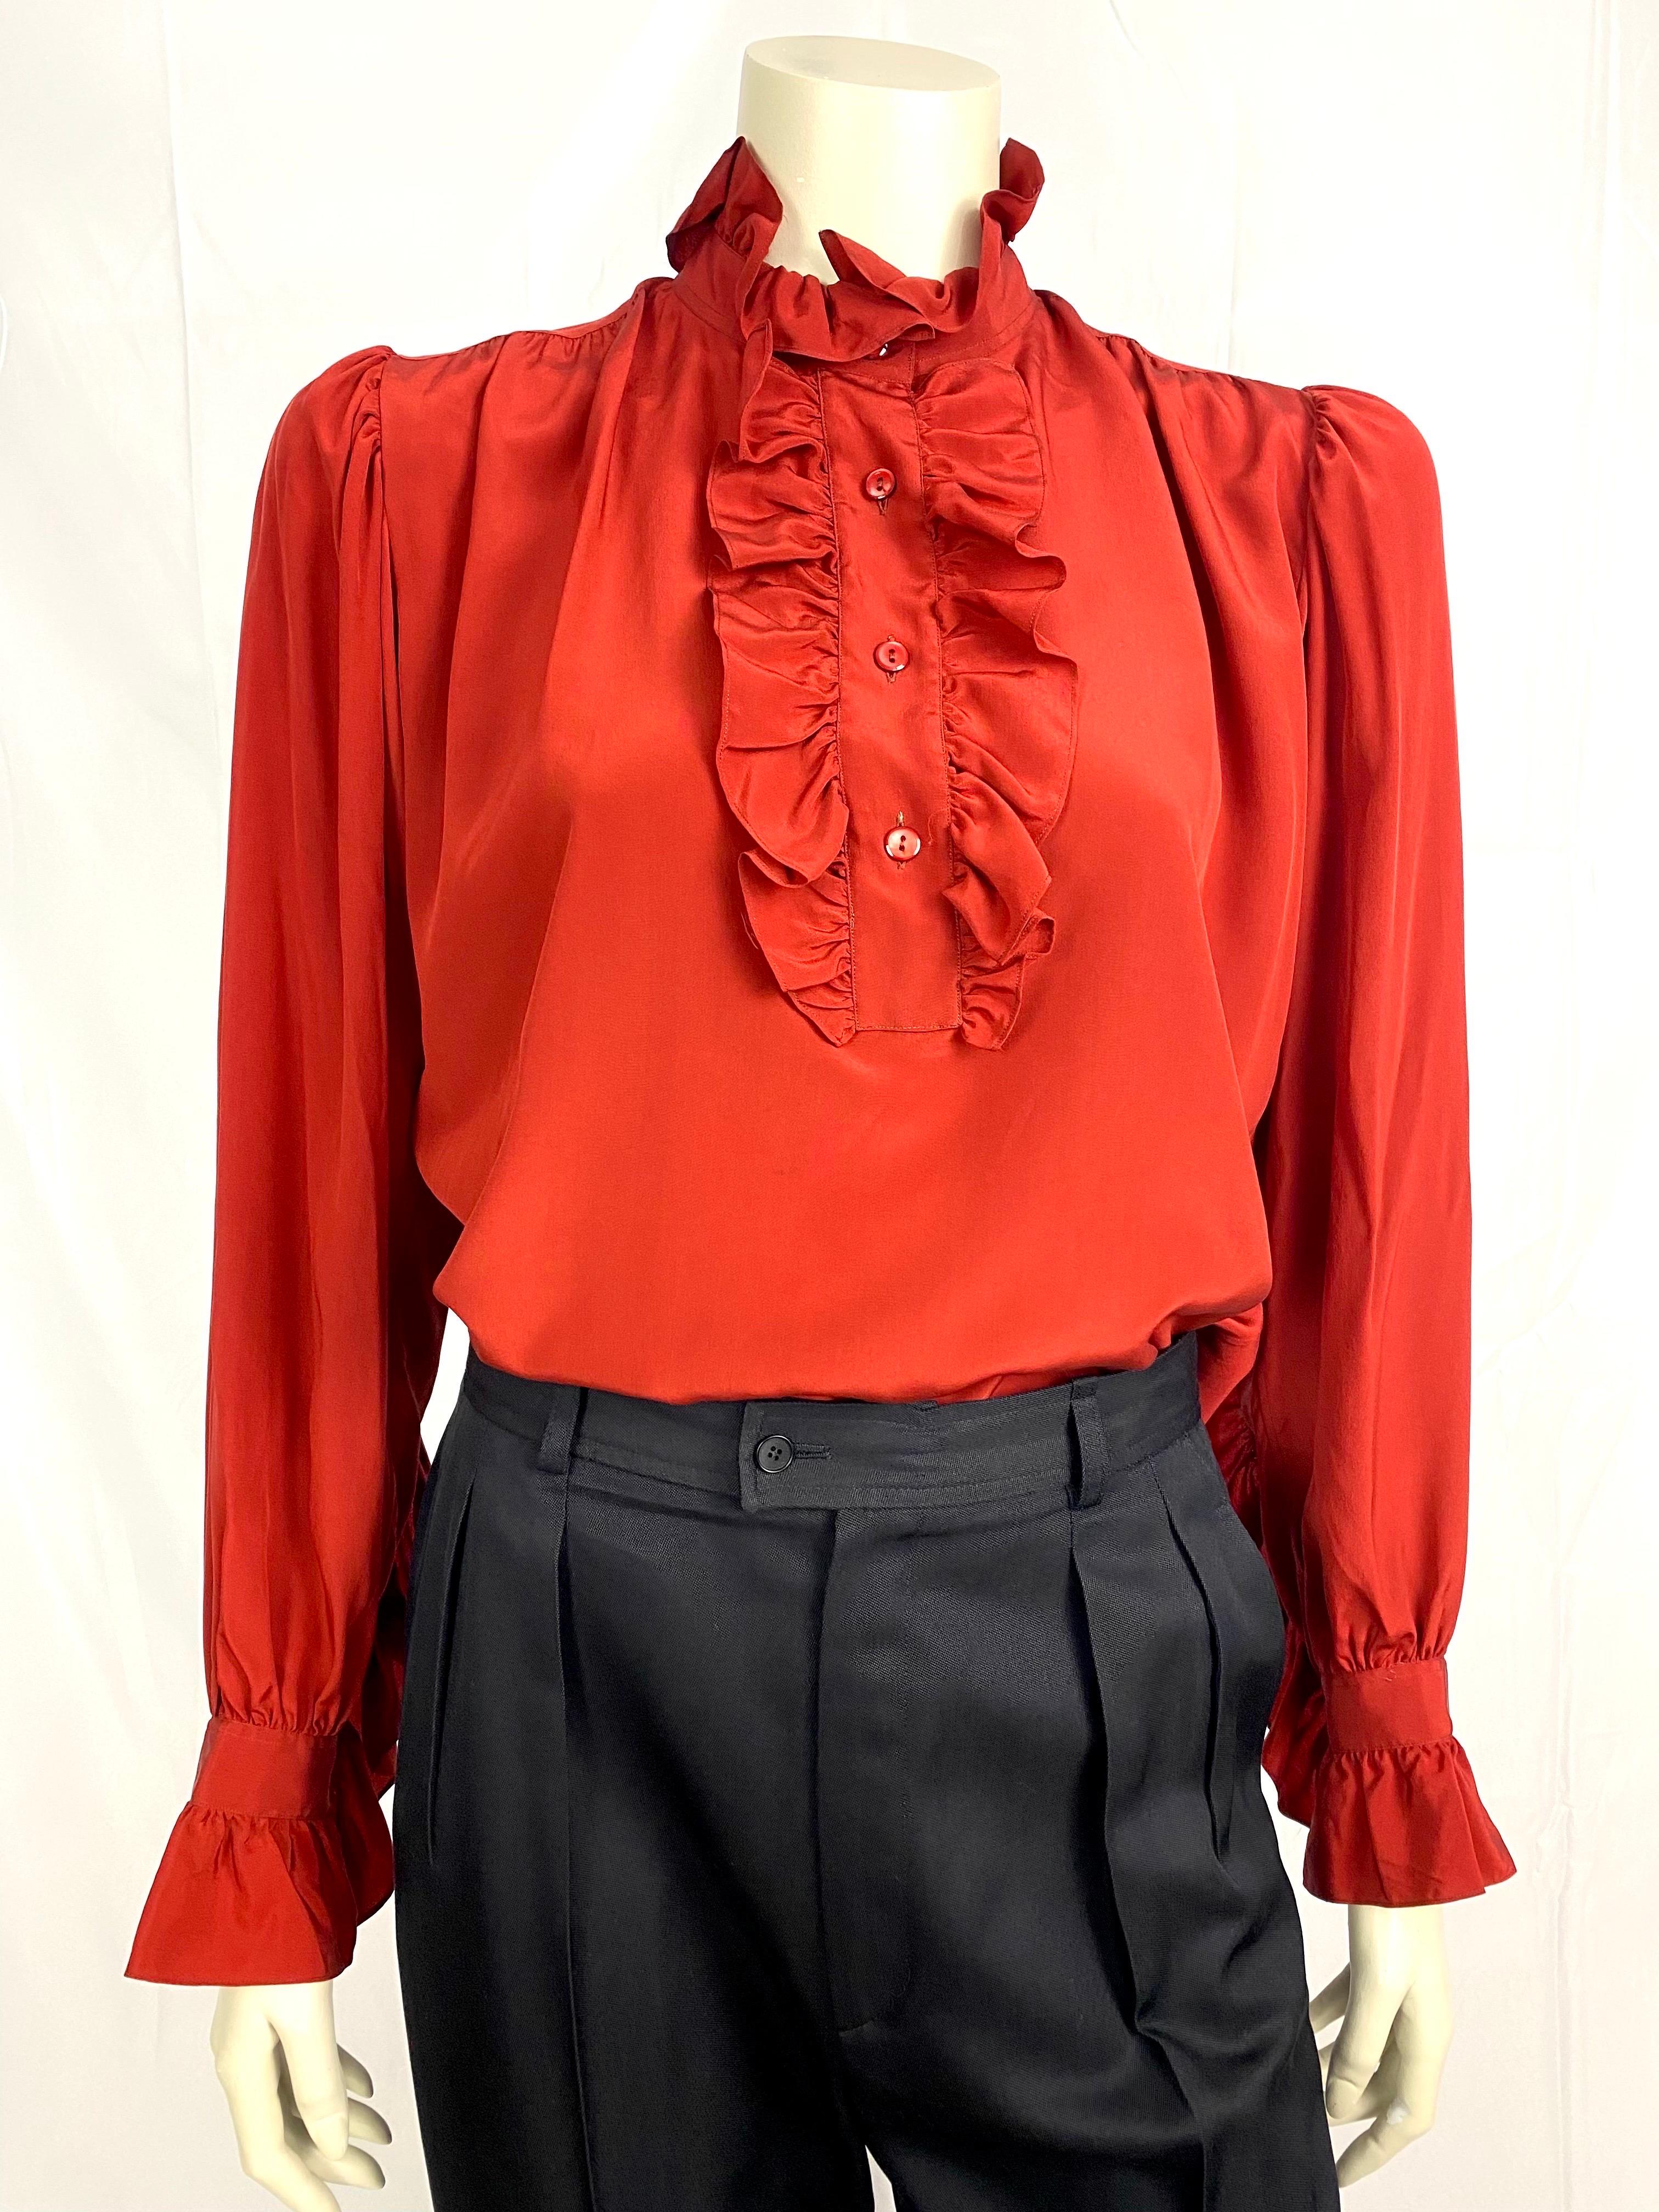 Vintage Yves Saint Laurent Rive Gauche blouse from 1970.
Cardinal red color with a ruffled Pierrot-type collar and a frilly buttoned bib.
Ruffled cuffs that go up slightly on the forearm.
Slightly puffed and gathered sleeves.
The back is also